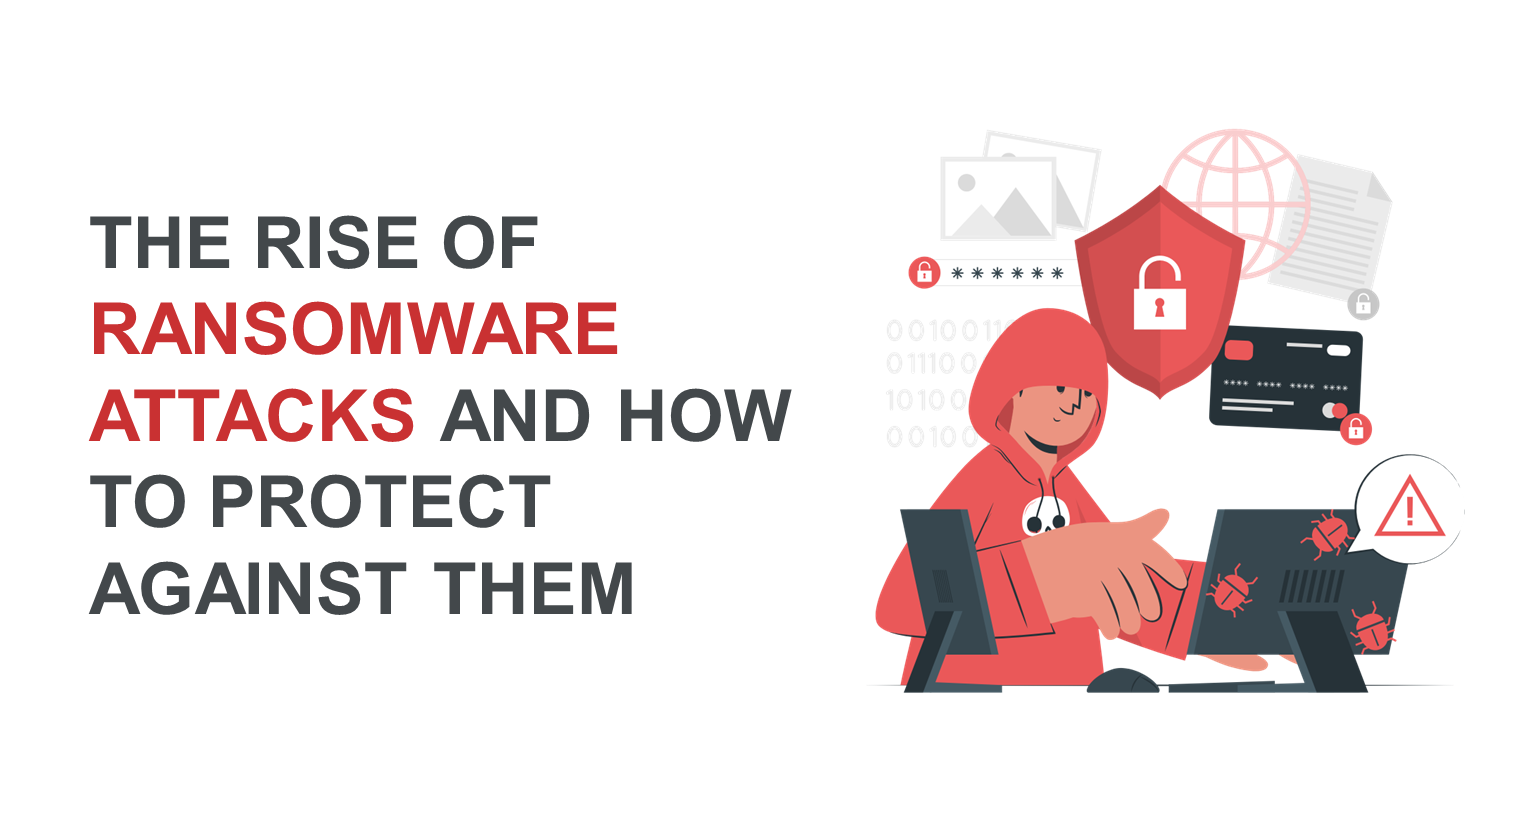 The rise of ransomware attacks and how to protect against them